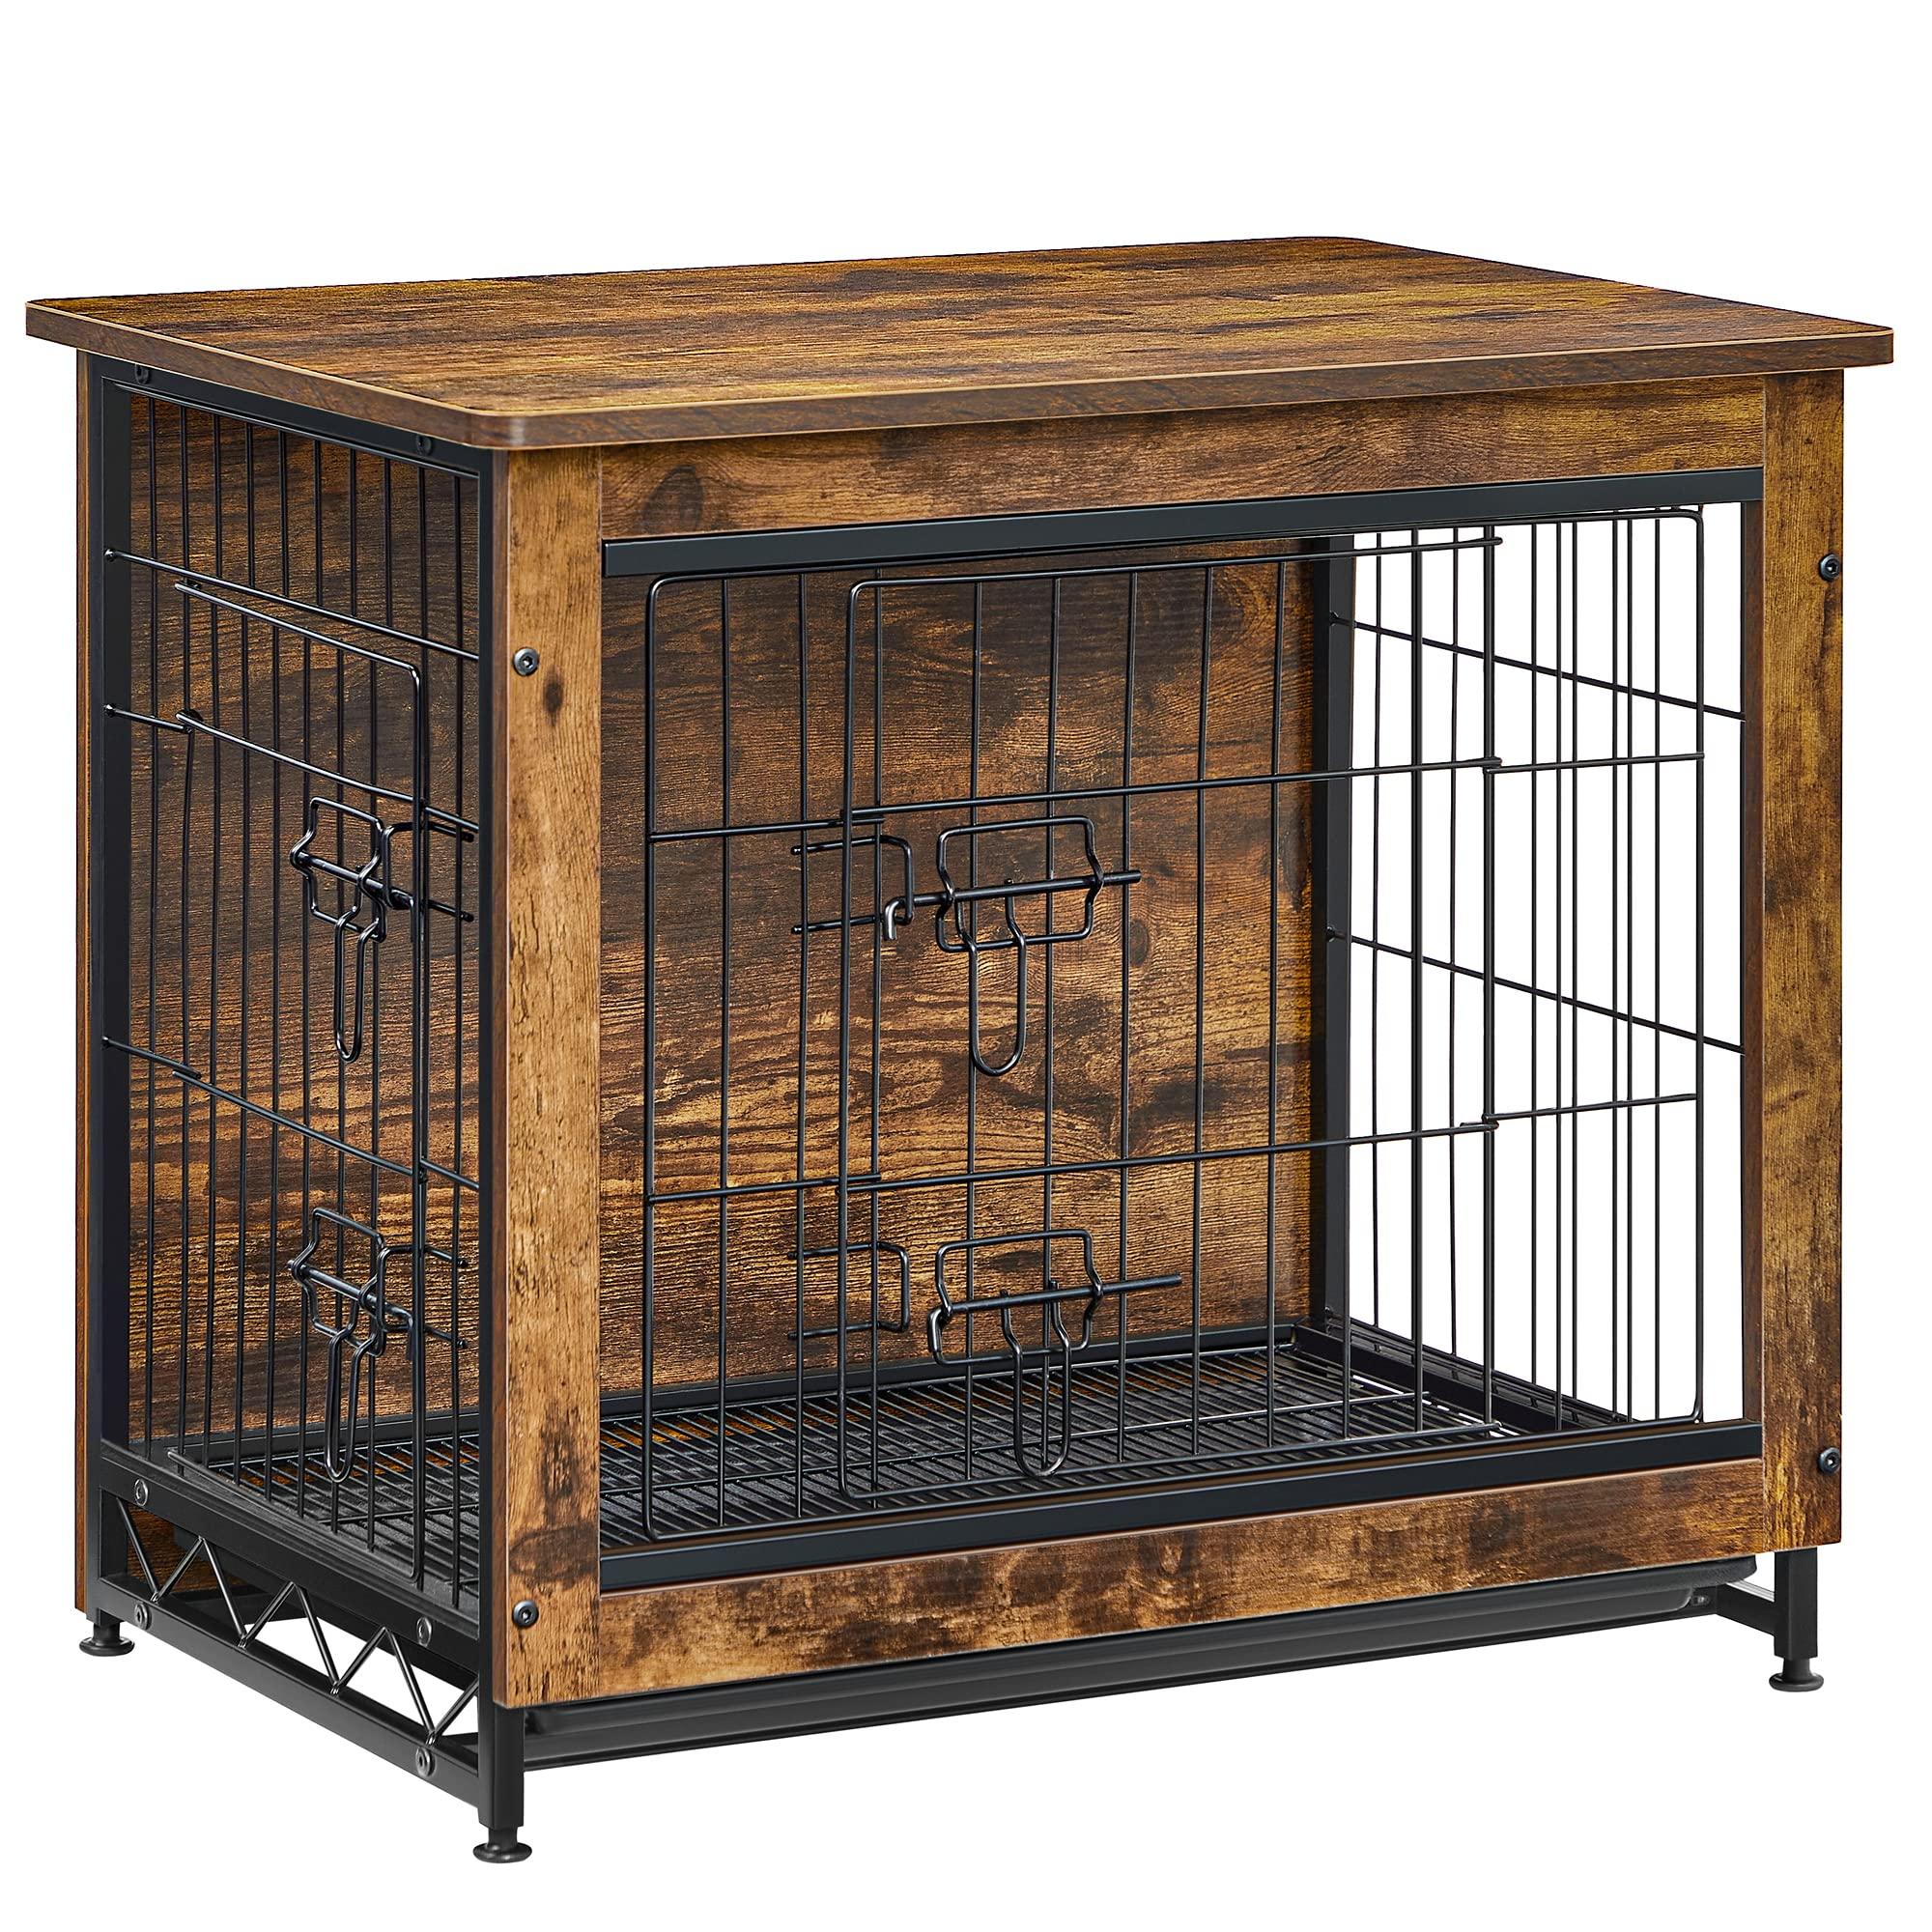 FEANDREA Dog Crate Furniture, Side End Table, Modern Kennel for Dogs Indoor up to 30 lb, Heavy-Duty Dog Cage with Multi-Purpose Removable Tray, Double-Door Dog House, Rustic Brown UPFC001X01